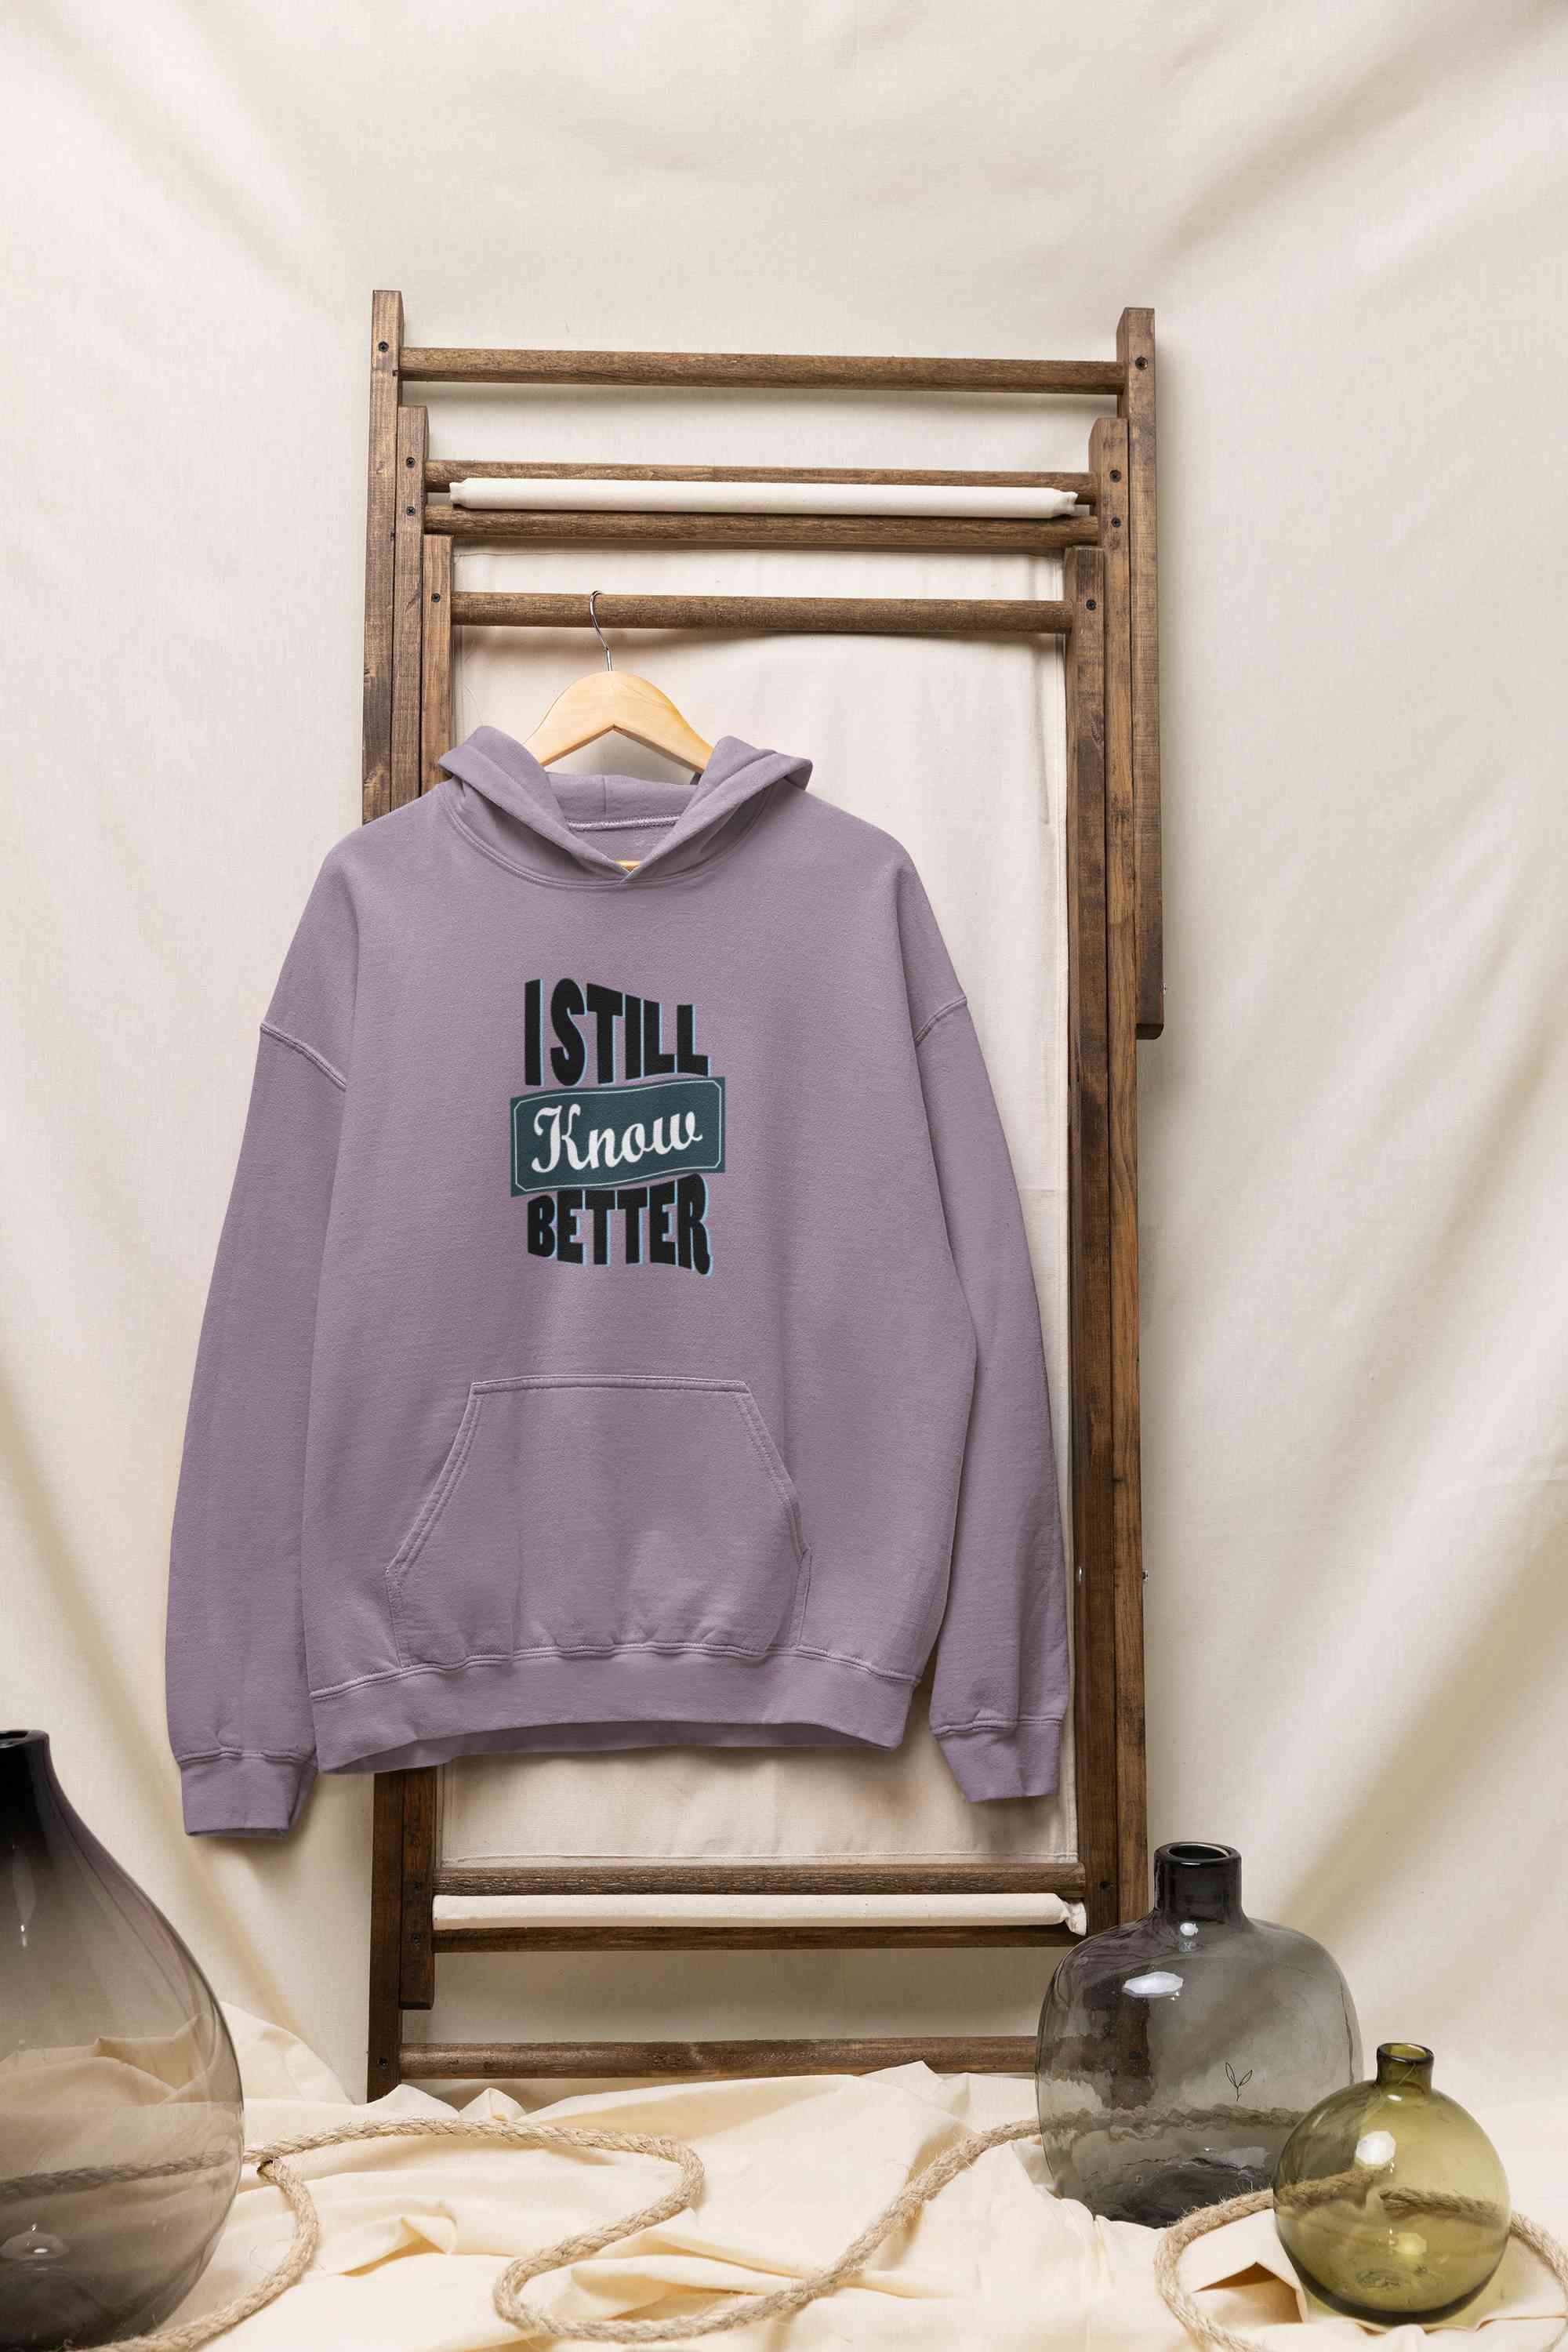 Still Know Better Quotes Hoodies for Women-FunkyTeesClub